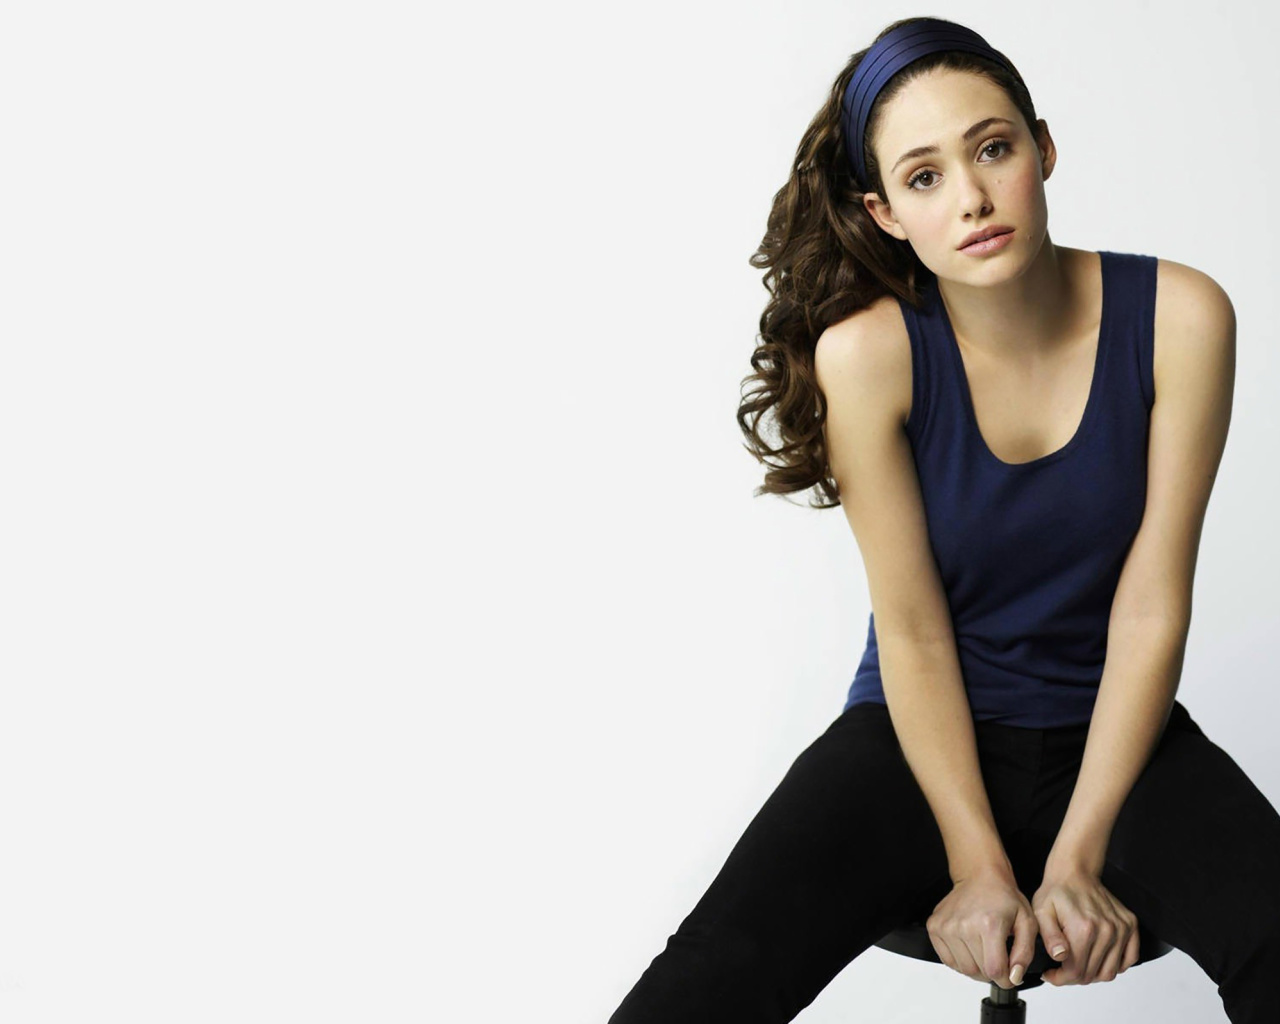 Emmy Rossum in Sweet Clothes wallpaper 1280x1024